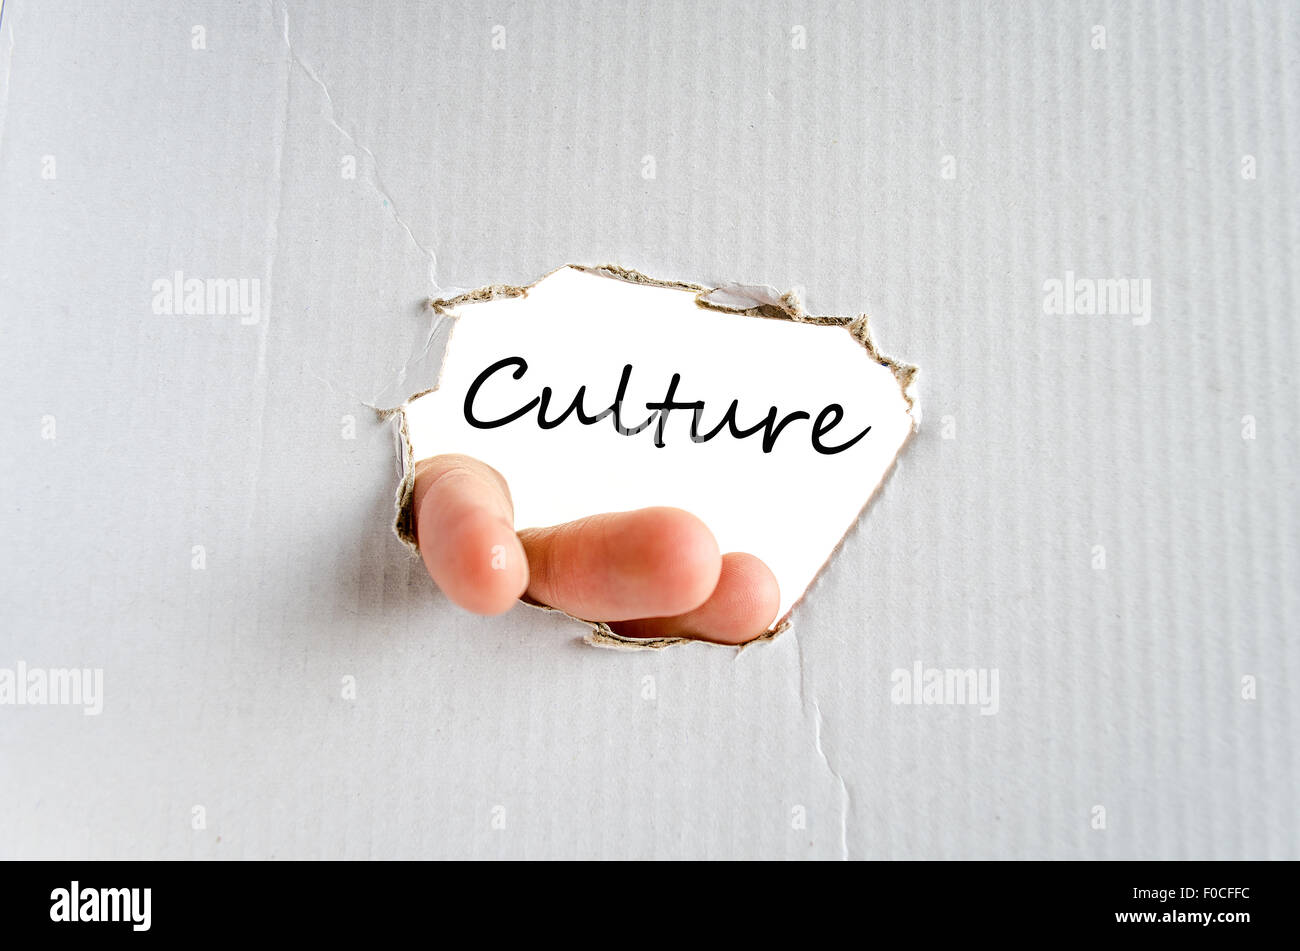 Culture text concept isolated over white background Stock Photo